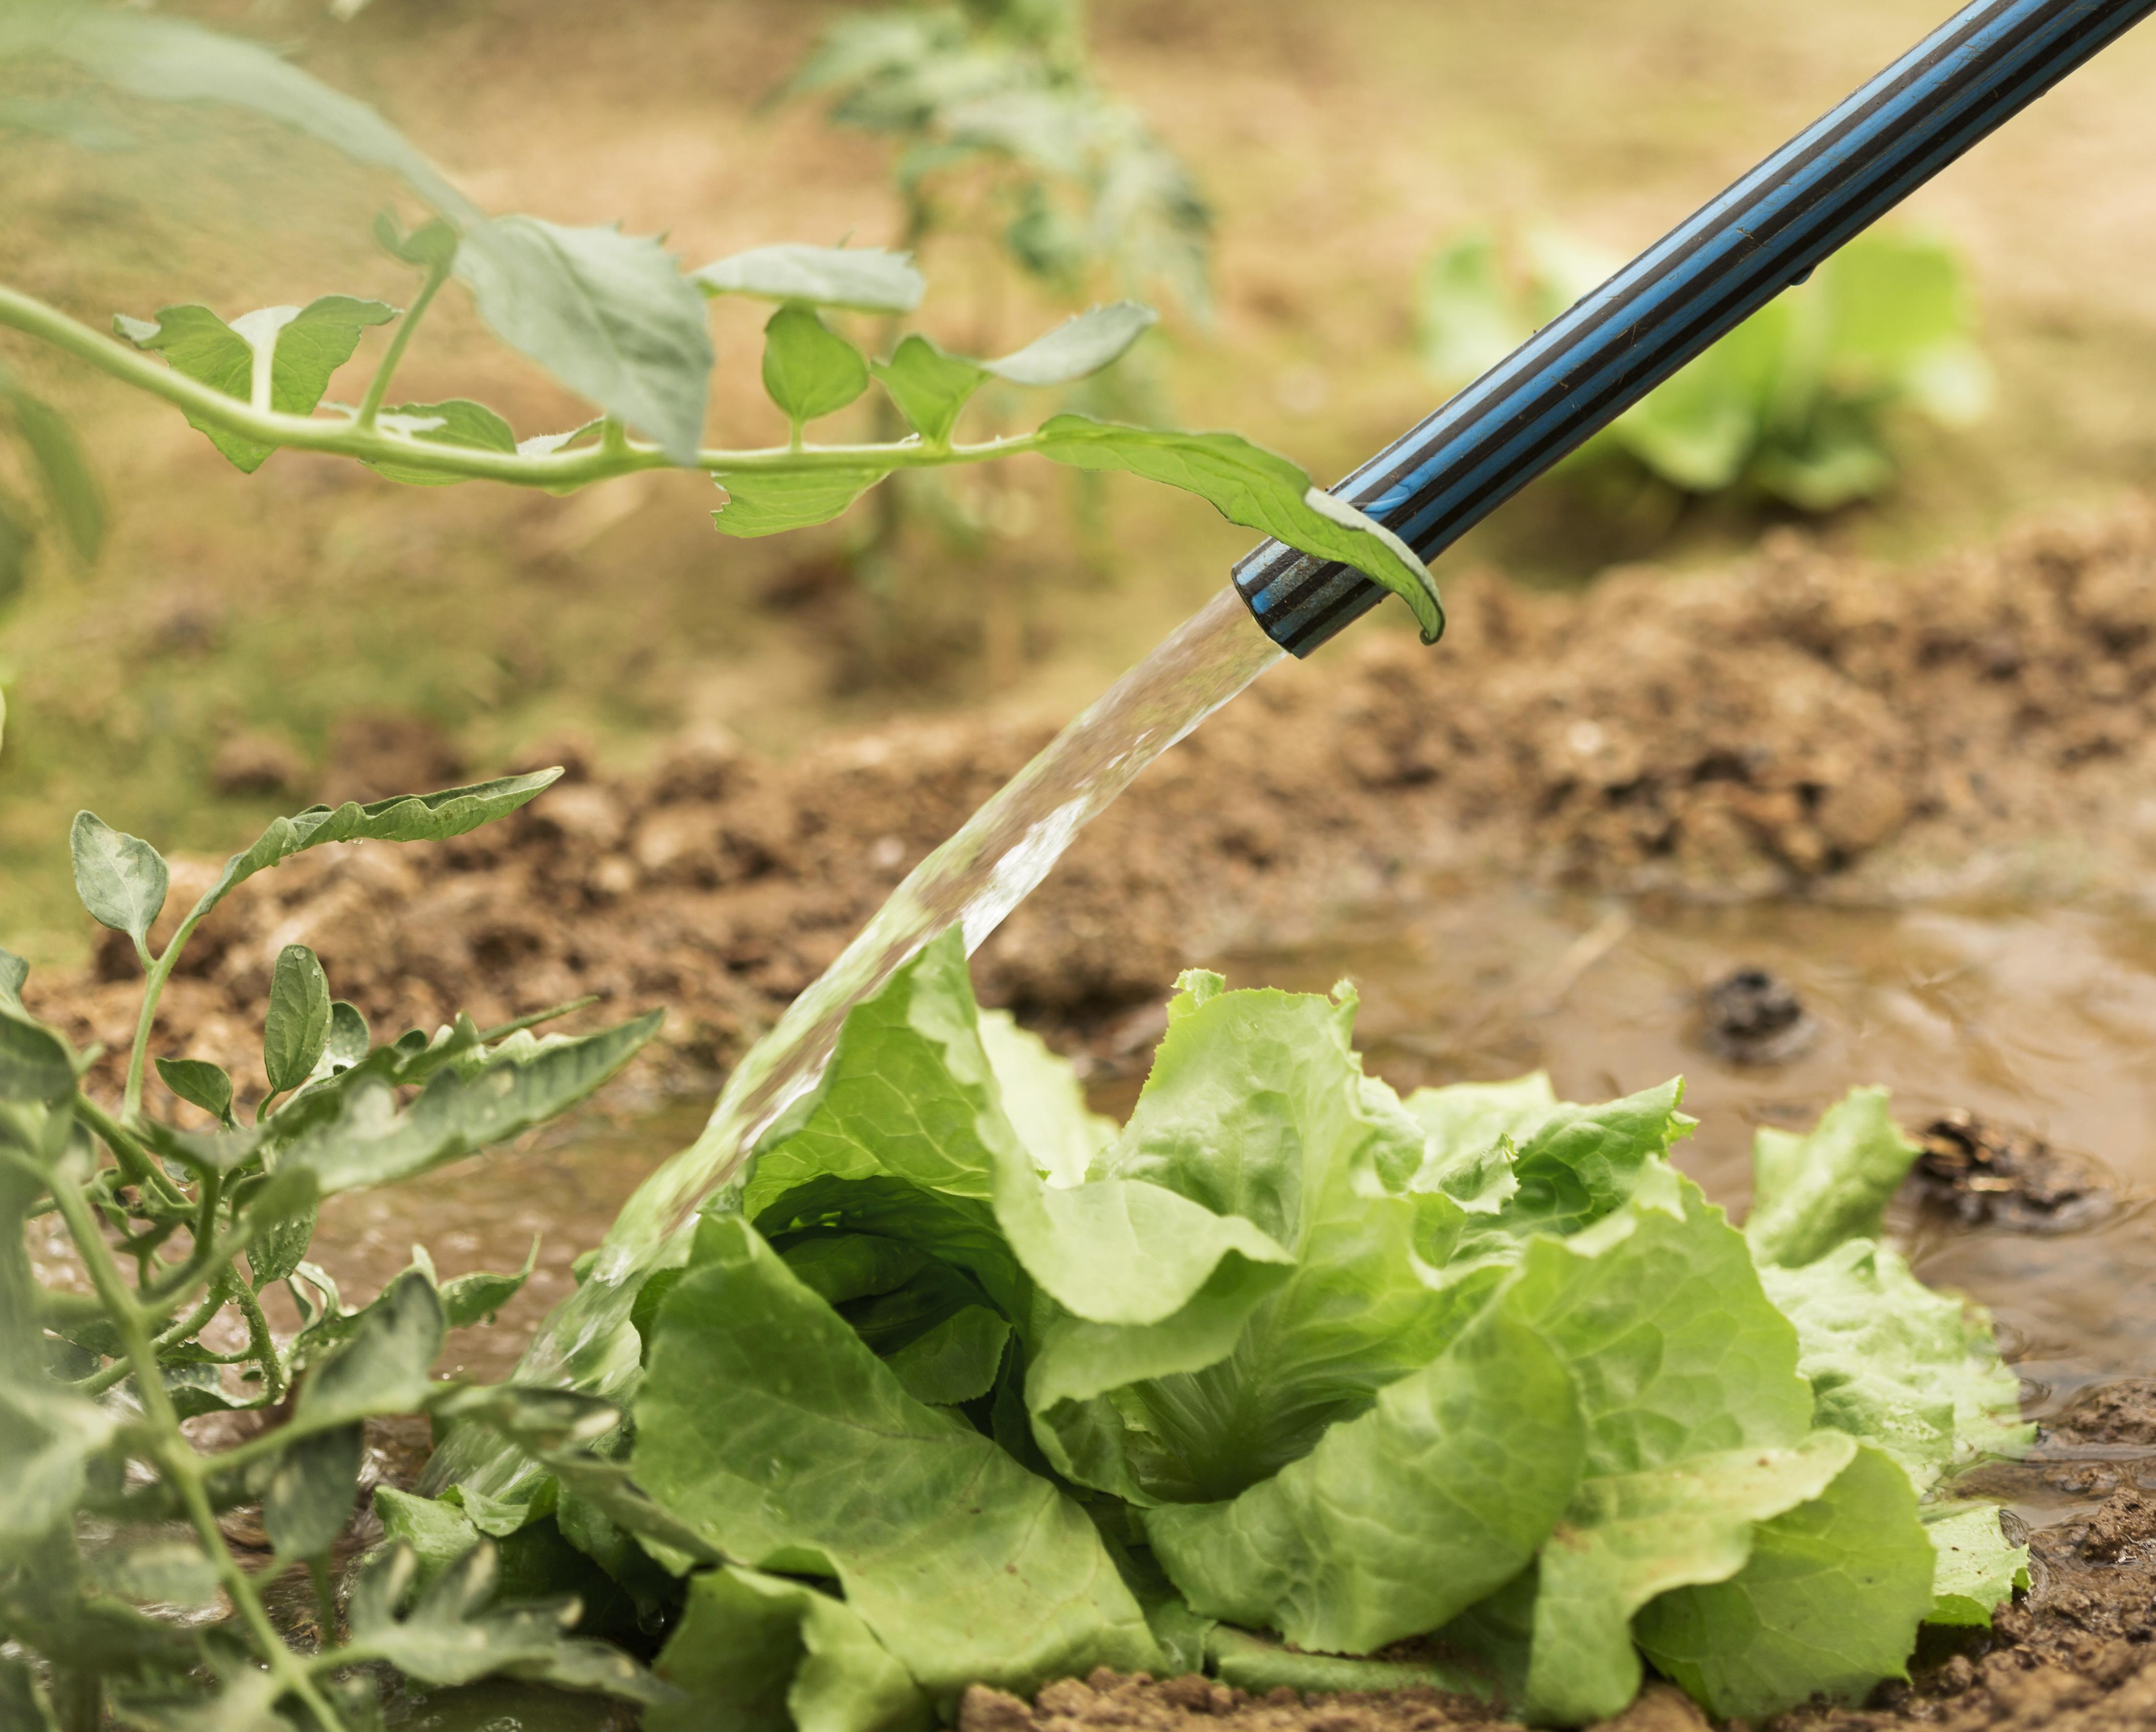 A hose watering the soil beside a lettuce plant